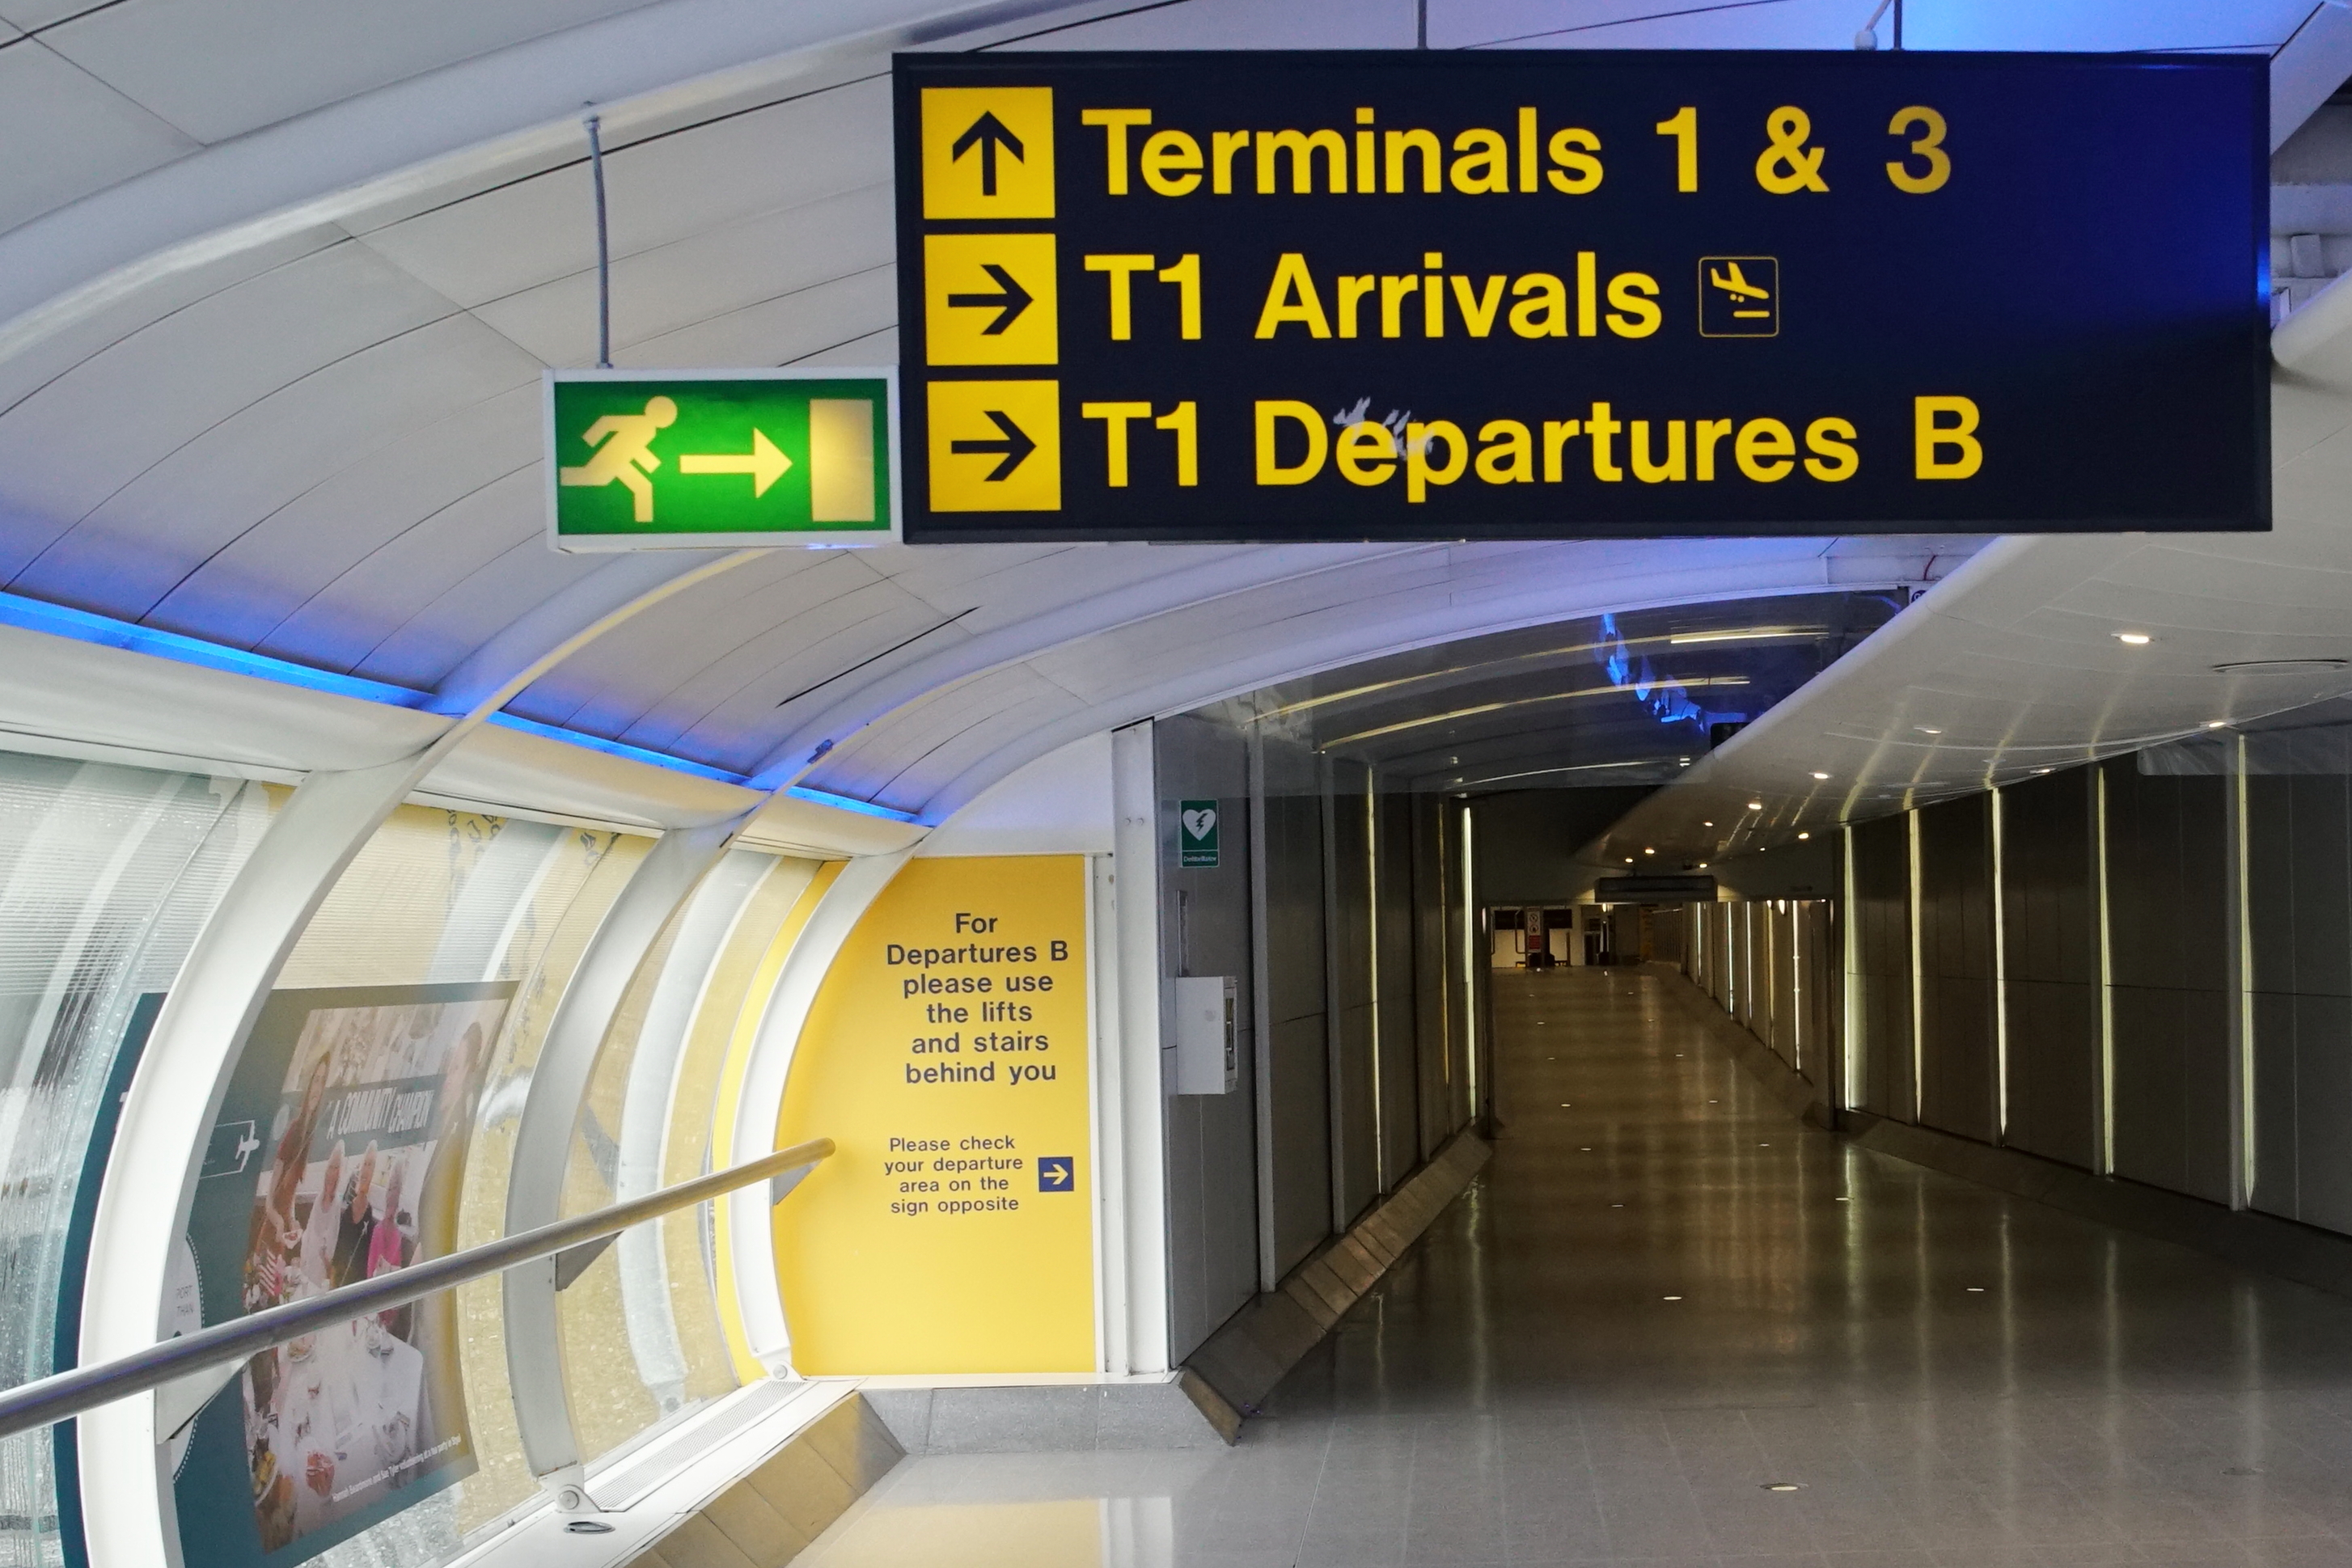 After reopening Terminals Two and Three in July, Manchester Airport has announced that it will close Terminal Two again from 2 September 2020. T2, which first closed in March towards the beginning of the ongoing COVID19 pandemic, will remain closed until further notice. Click to enlarge.